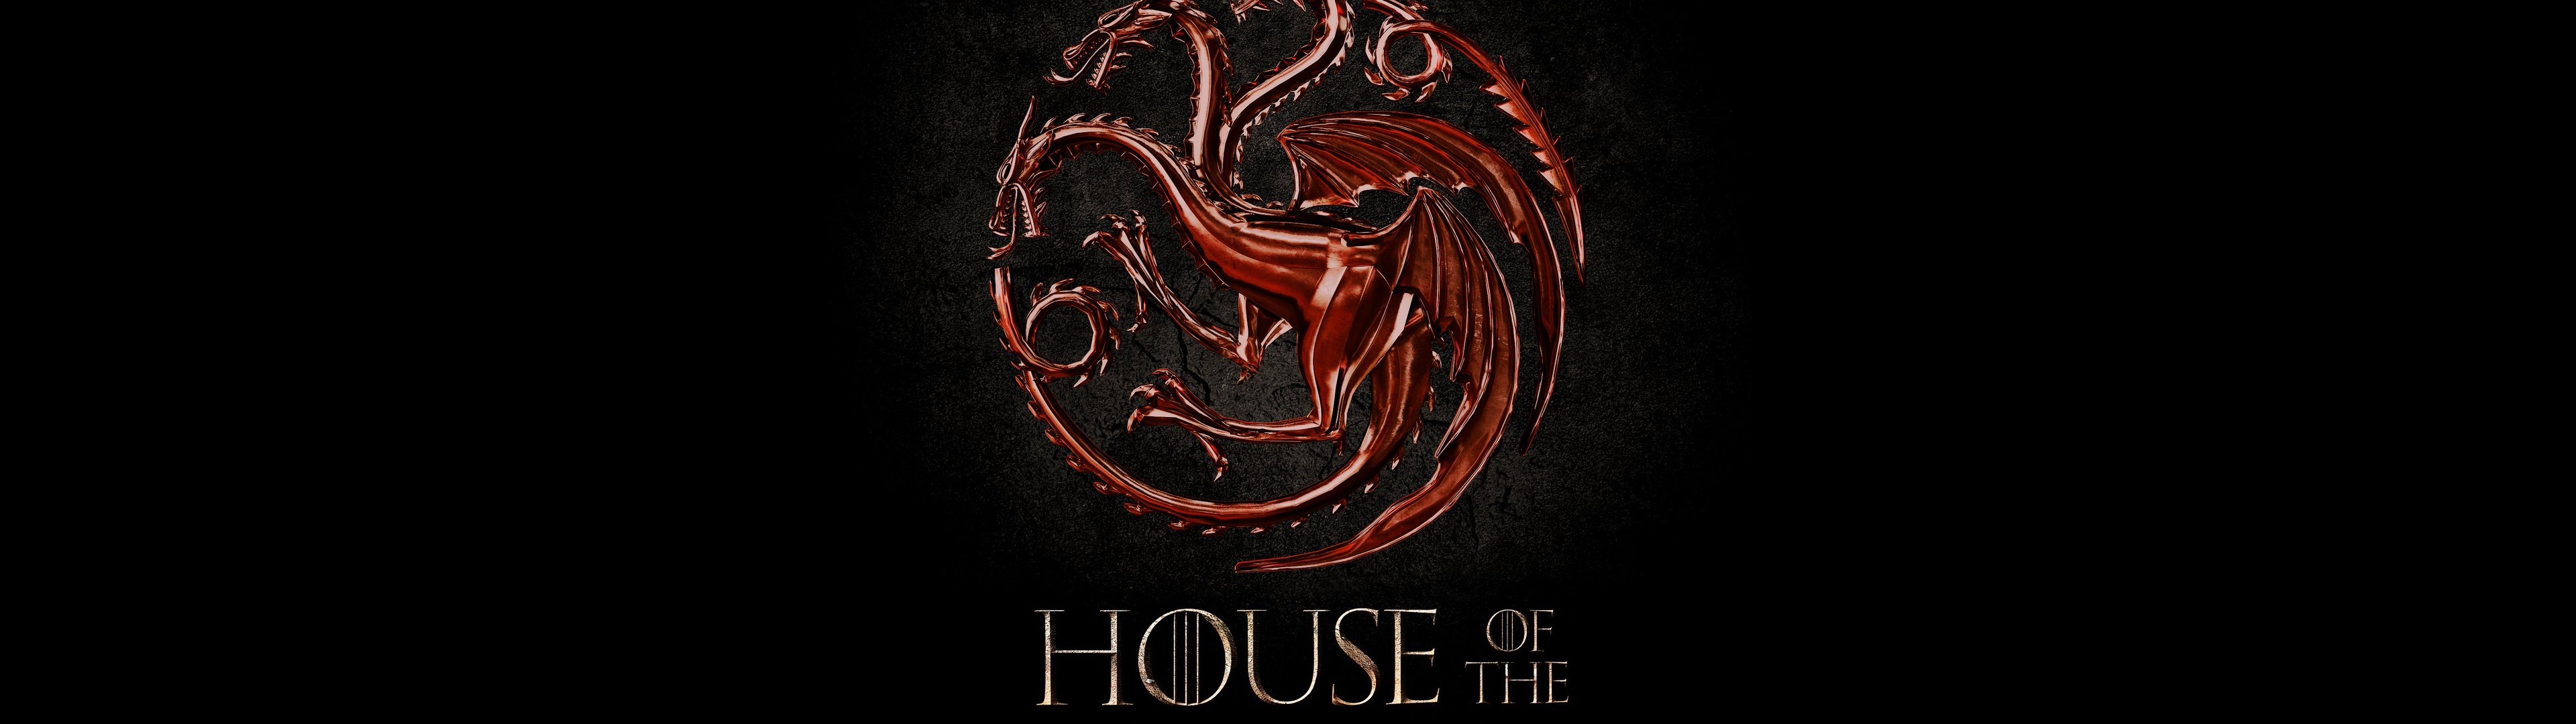 House Of The Dragon HD Wallpapers  4K Backgrounds  Wallpapers Den